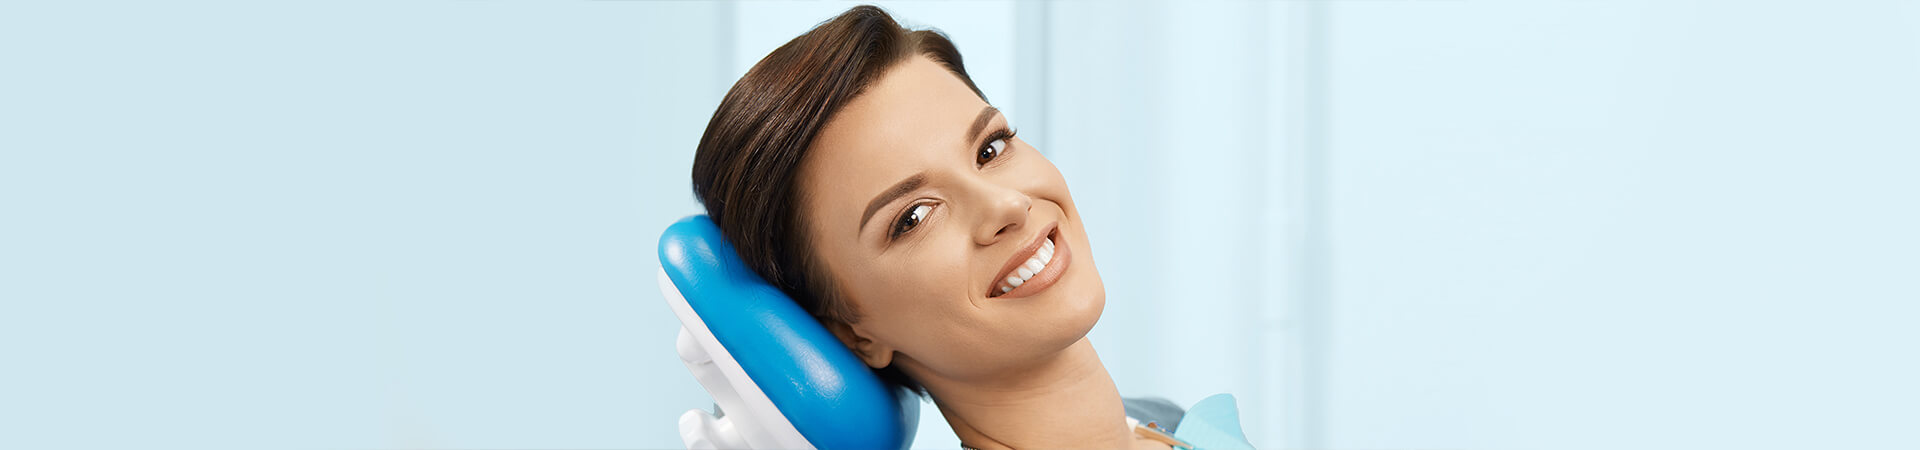 Life-Changing Benefits of Teeth Whitening Treatments